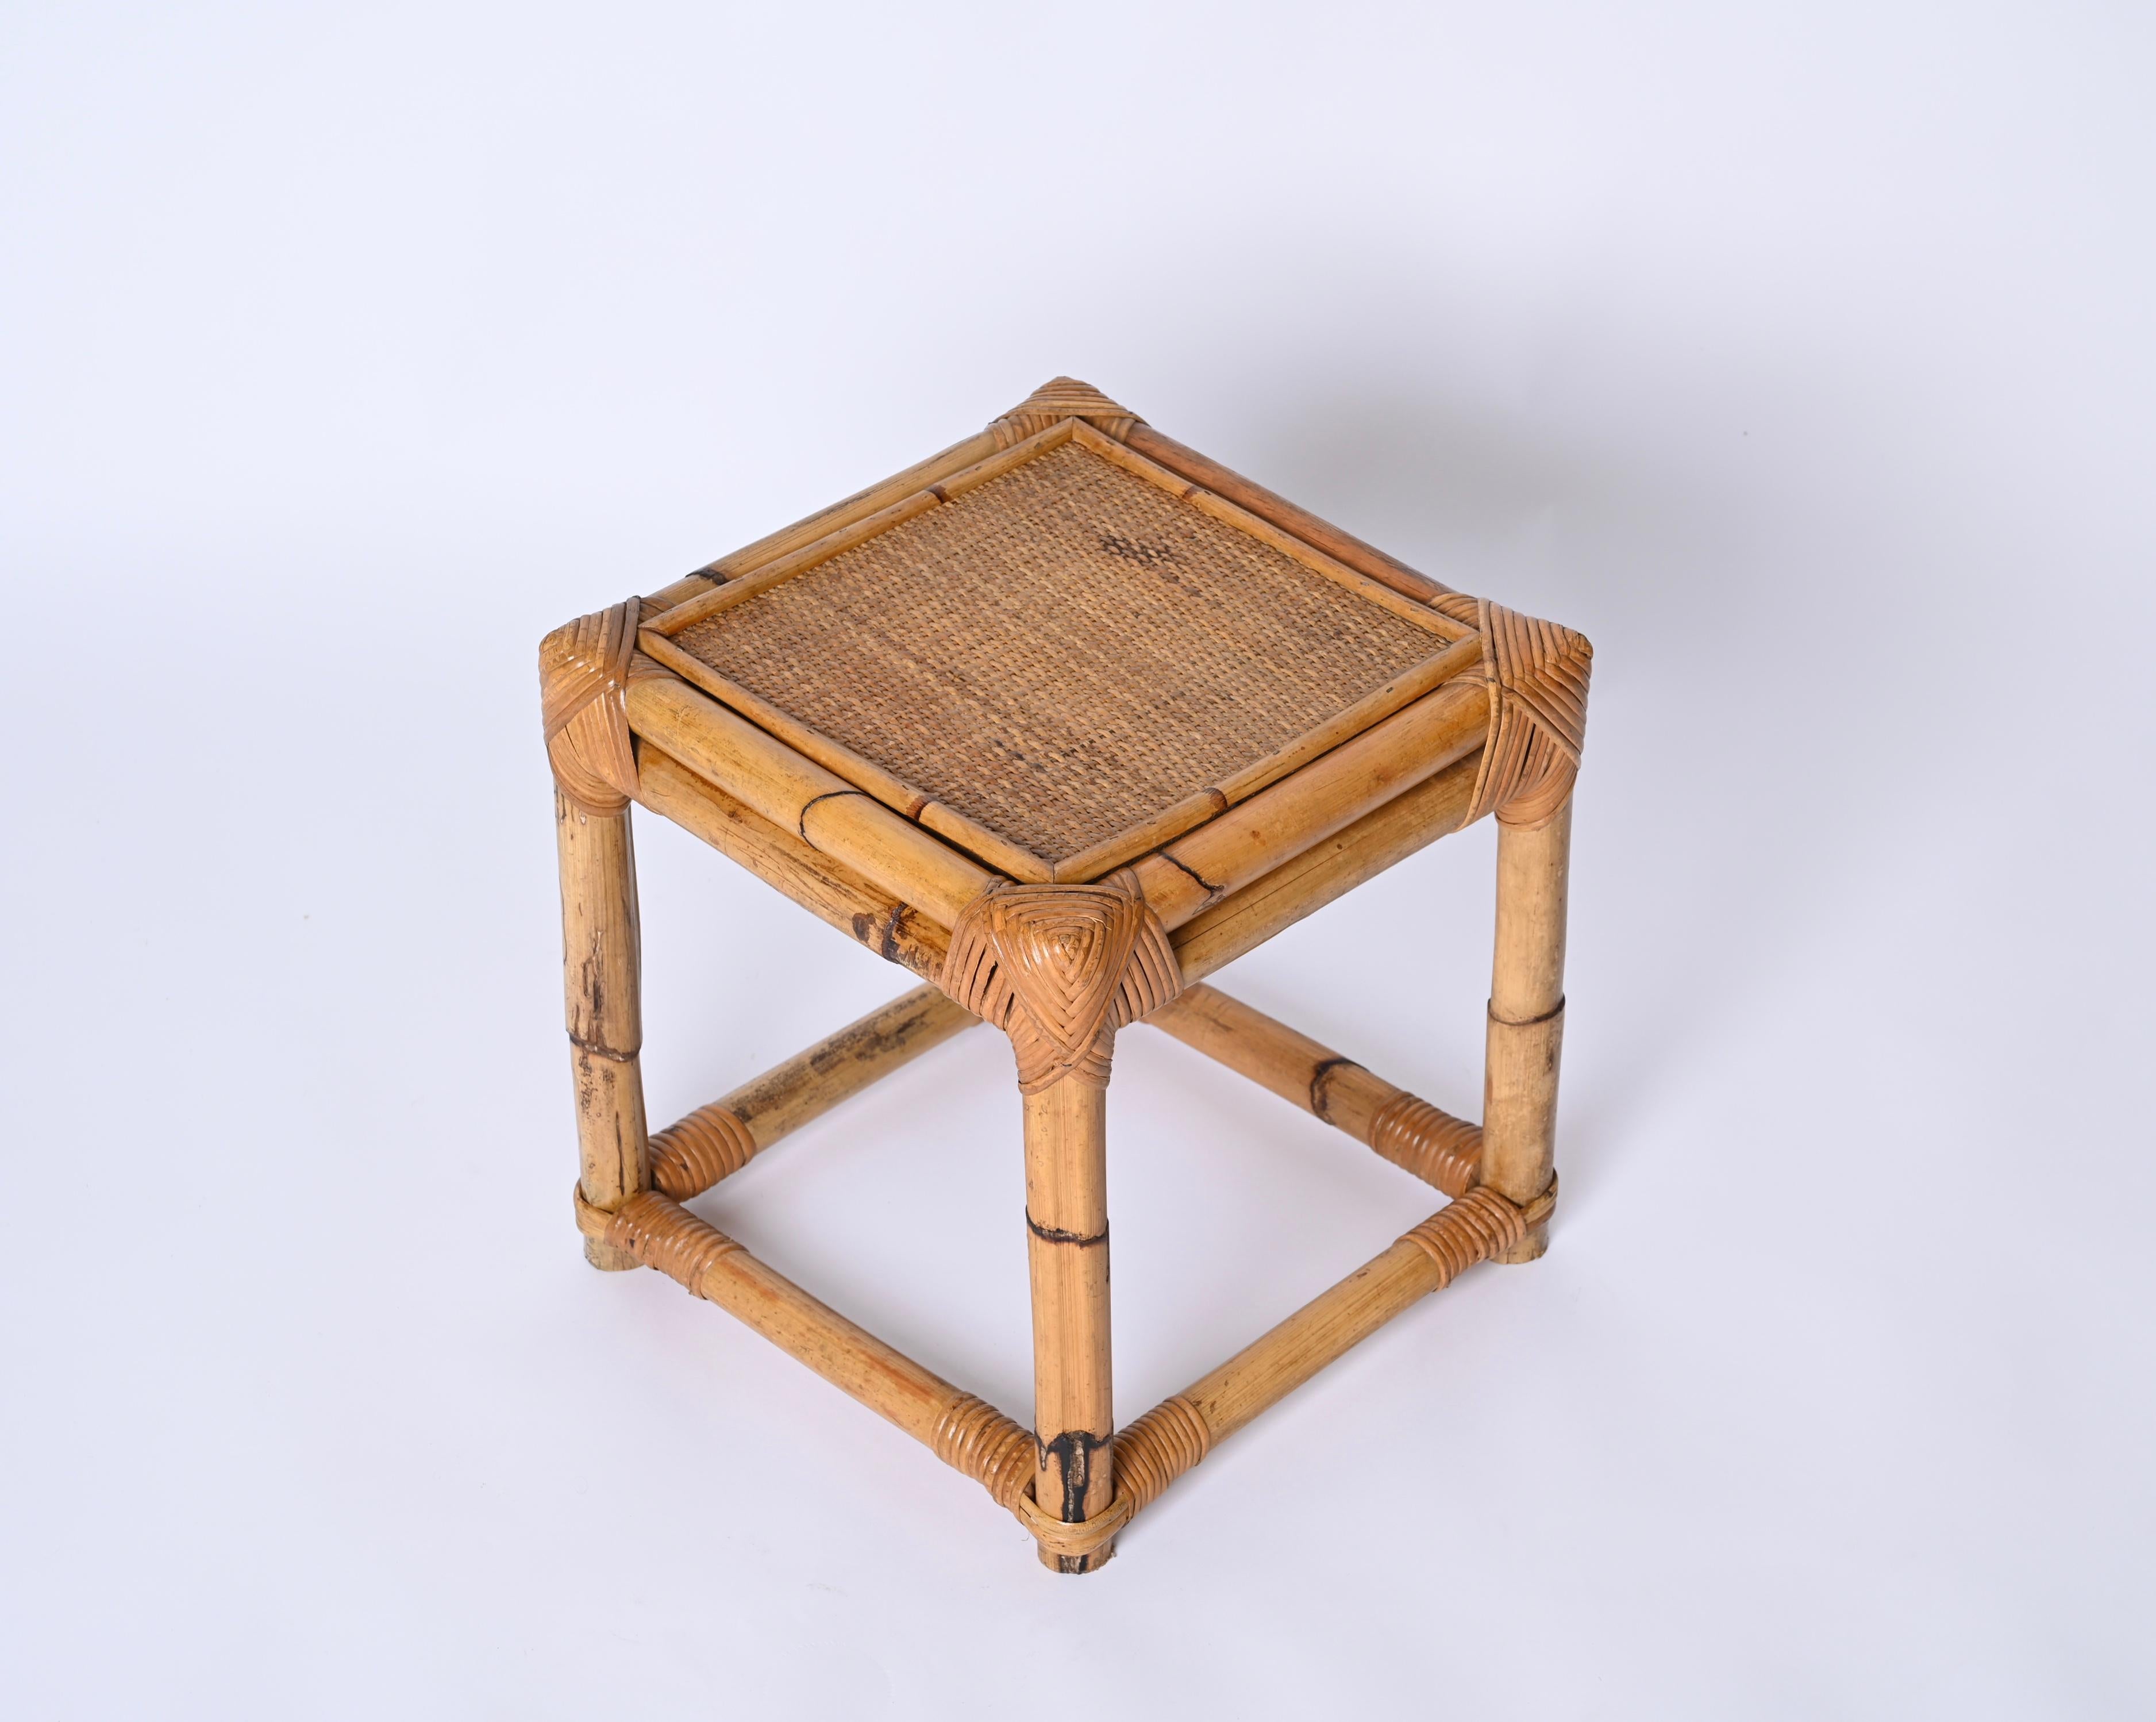 Hand-Woven Italian Midcentury Cube Side Table or Pouf in Bamboo and Rattan, 1970s For Sale